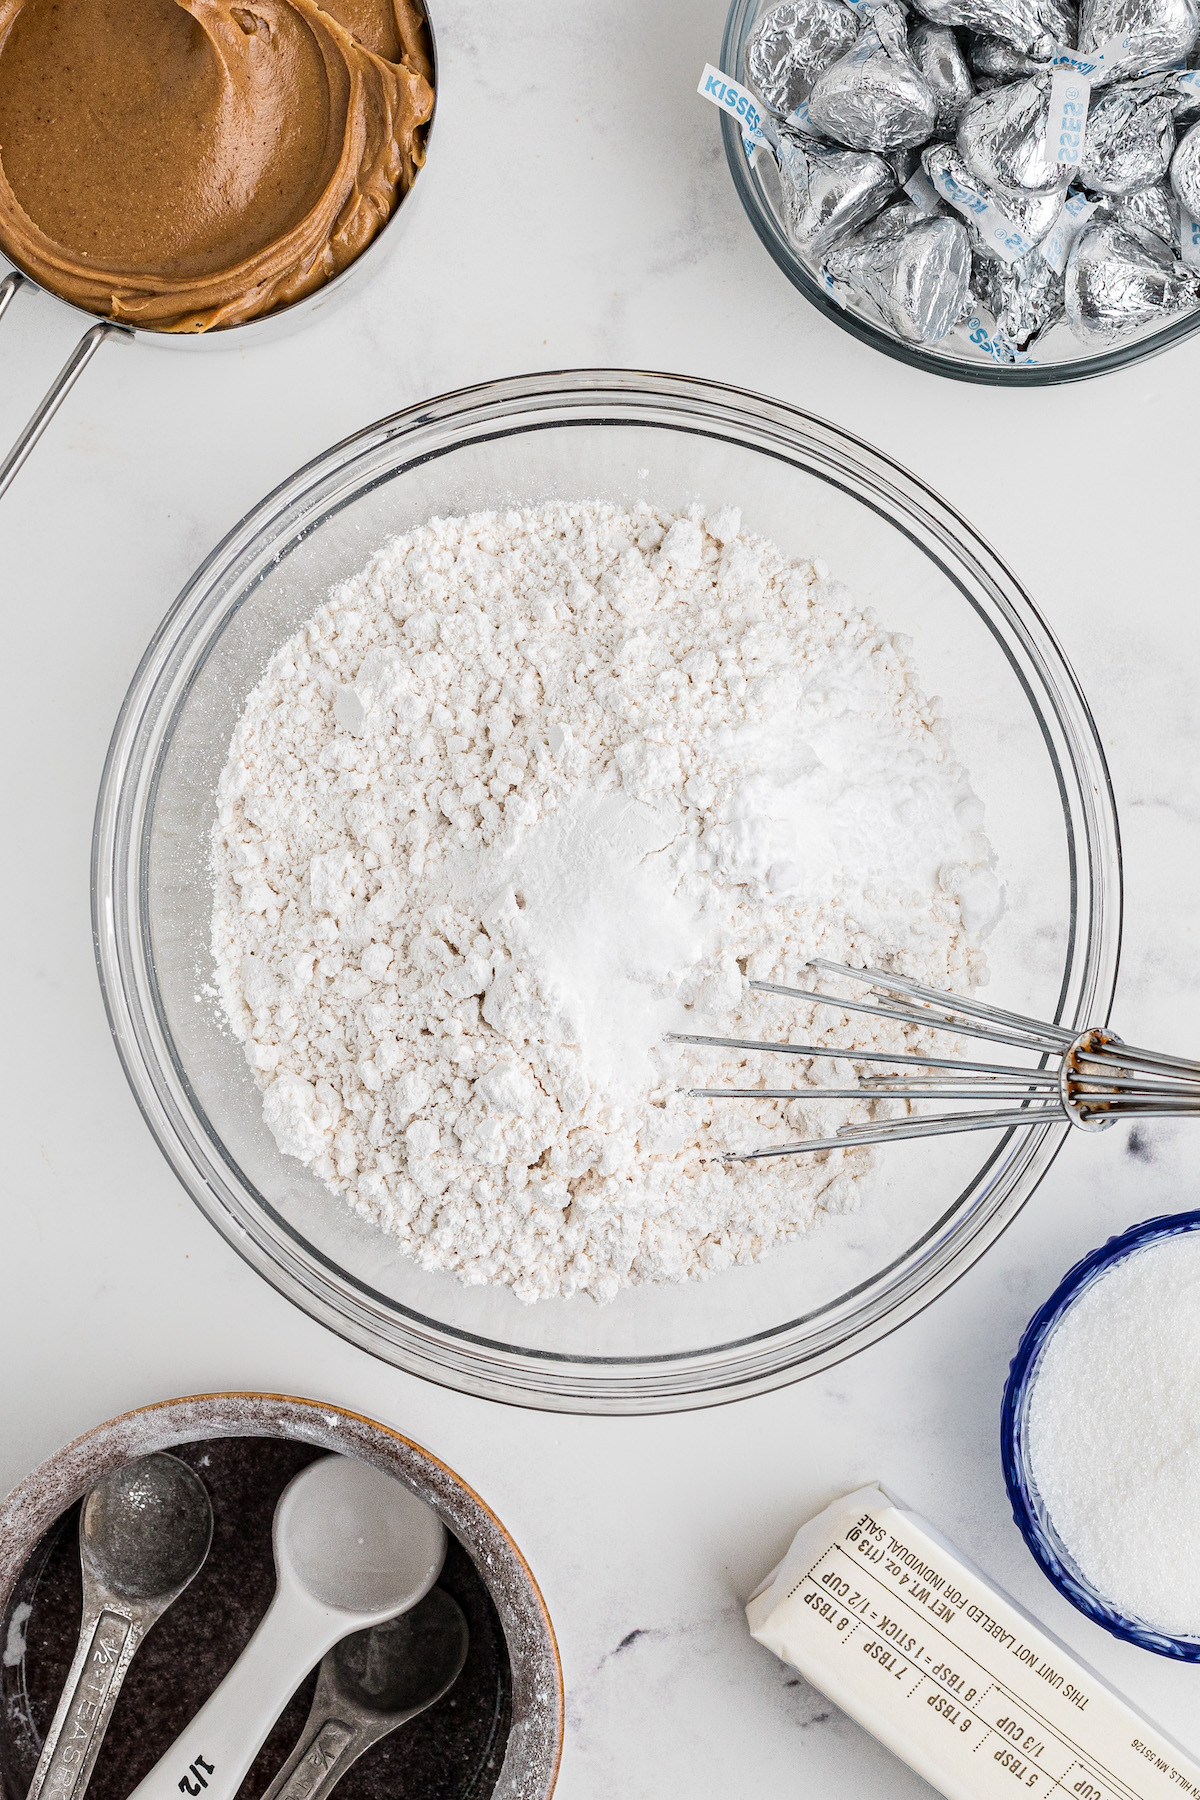 flour, baking powder, baking soda and salt being mixed in a bowl